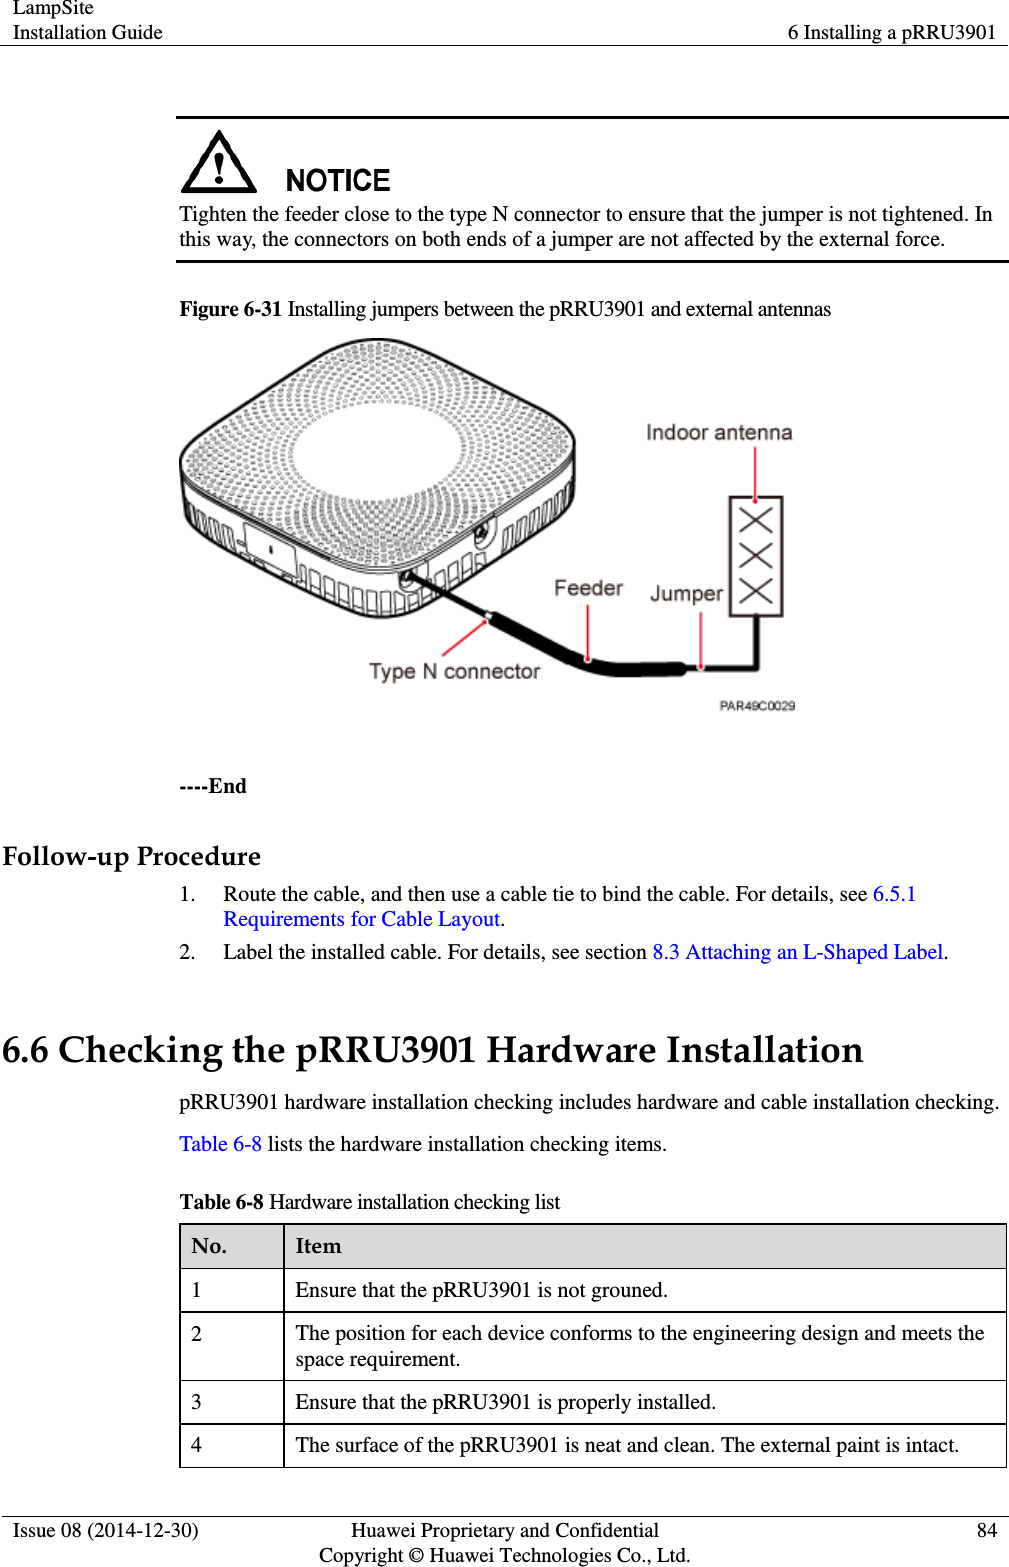 LampSite Installation Guide 6 Installing a pRRU3901  Issue 08 (2014-12-30) Huawei Proprietary and Confidential                                     Copyright © Huawei Technologies Co., Ltd. 84    Tighten the feeder close to the type N connector to ensure that the jumper is not tightened. In this way, the connectors on both ends of a jumper are not affected by the external force. Figure 6-31 Installing jumpers between the pRRU3901 and external antennas   ----End Follow-up Procedure 1. Route the cable, and then use a cable tie to bind the cable. For details, see 6.5.1 Requirements for Cable Layout. 2. Label the installed cable. For details, see section 8.3 Attaching an L-Shaped Label. 6.6 Checking the pRRU3901 Hardware Installation pRRU3901 hardware installation checking includes hardware and cable installation checking. Table 6-8 lists the hardware installation checking items. Table 6-8 Hardware installation checking list No. Item 1 Ensure that the pRRU3901 is not grouned. 2 The position for each device conforms to the engineering design and meets the space requirement.   3 Ensure that the pRRU3901 is properly installed. 4 The surface of the pRRU3901 is neat and clean. The external paint is intact. 